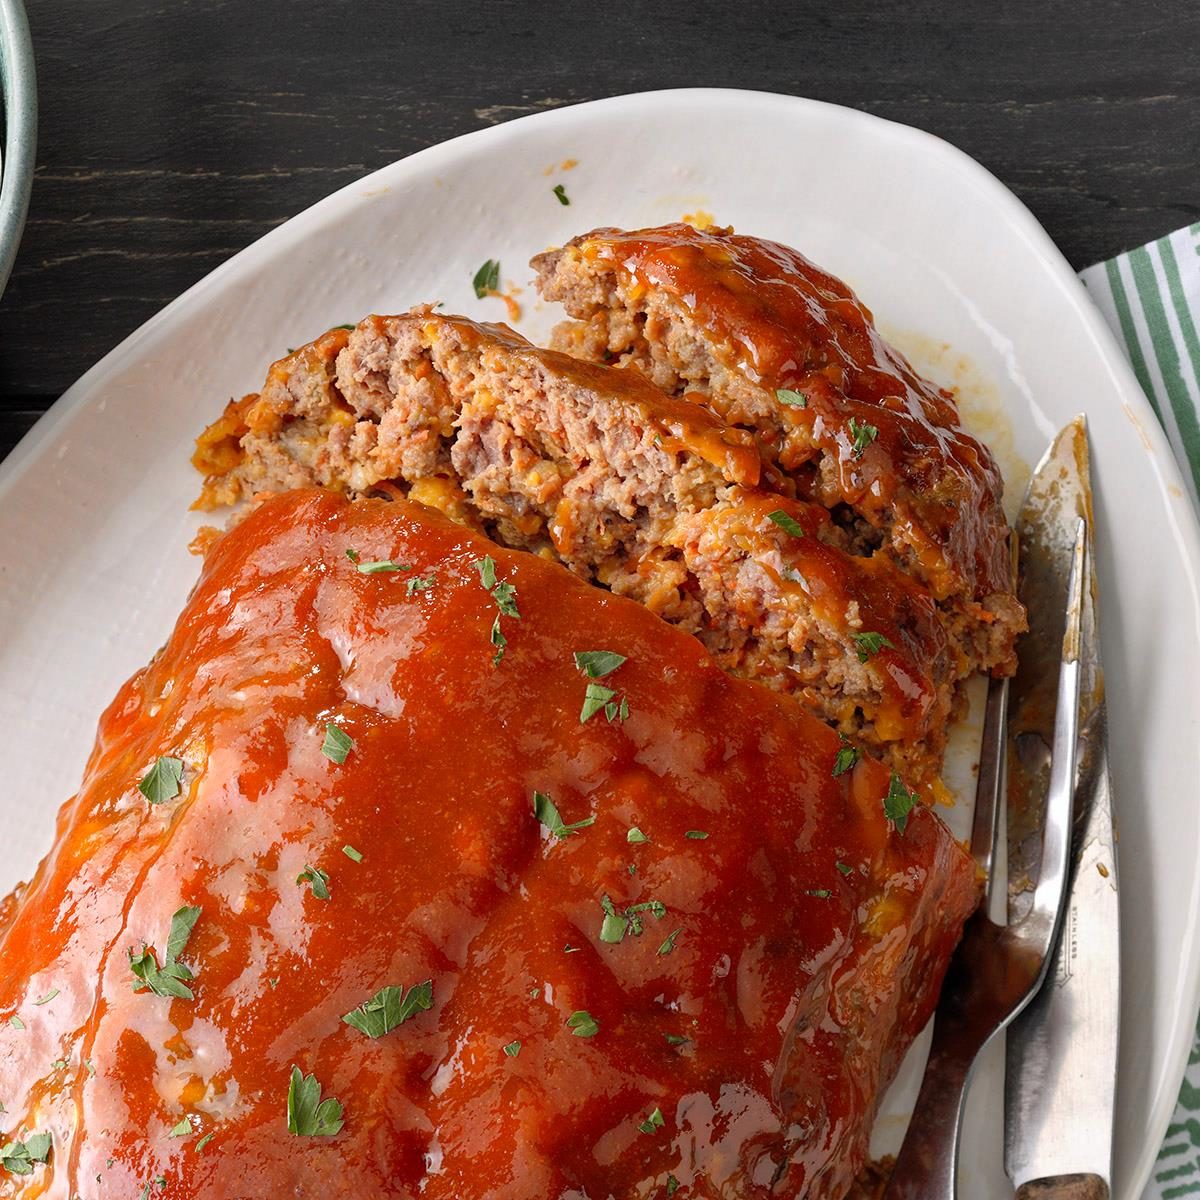 Home-Style Glazed Meat Loaf Recipe: How to Make It | Taste of Home